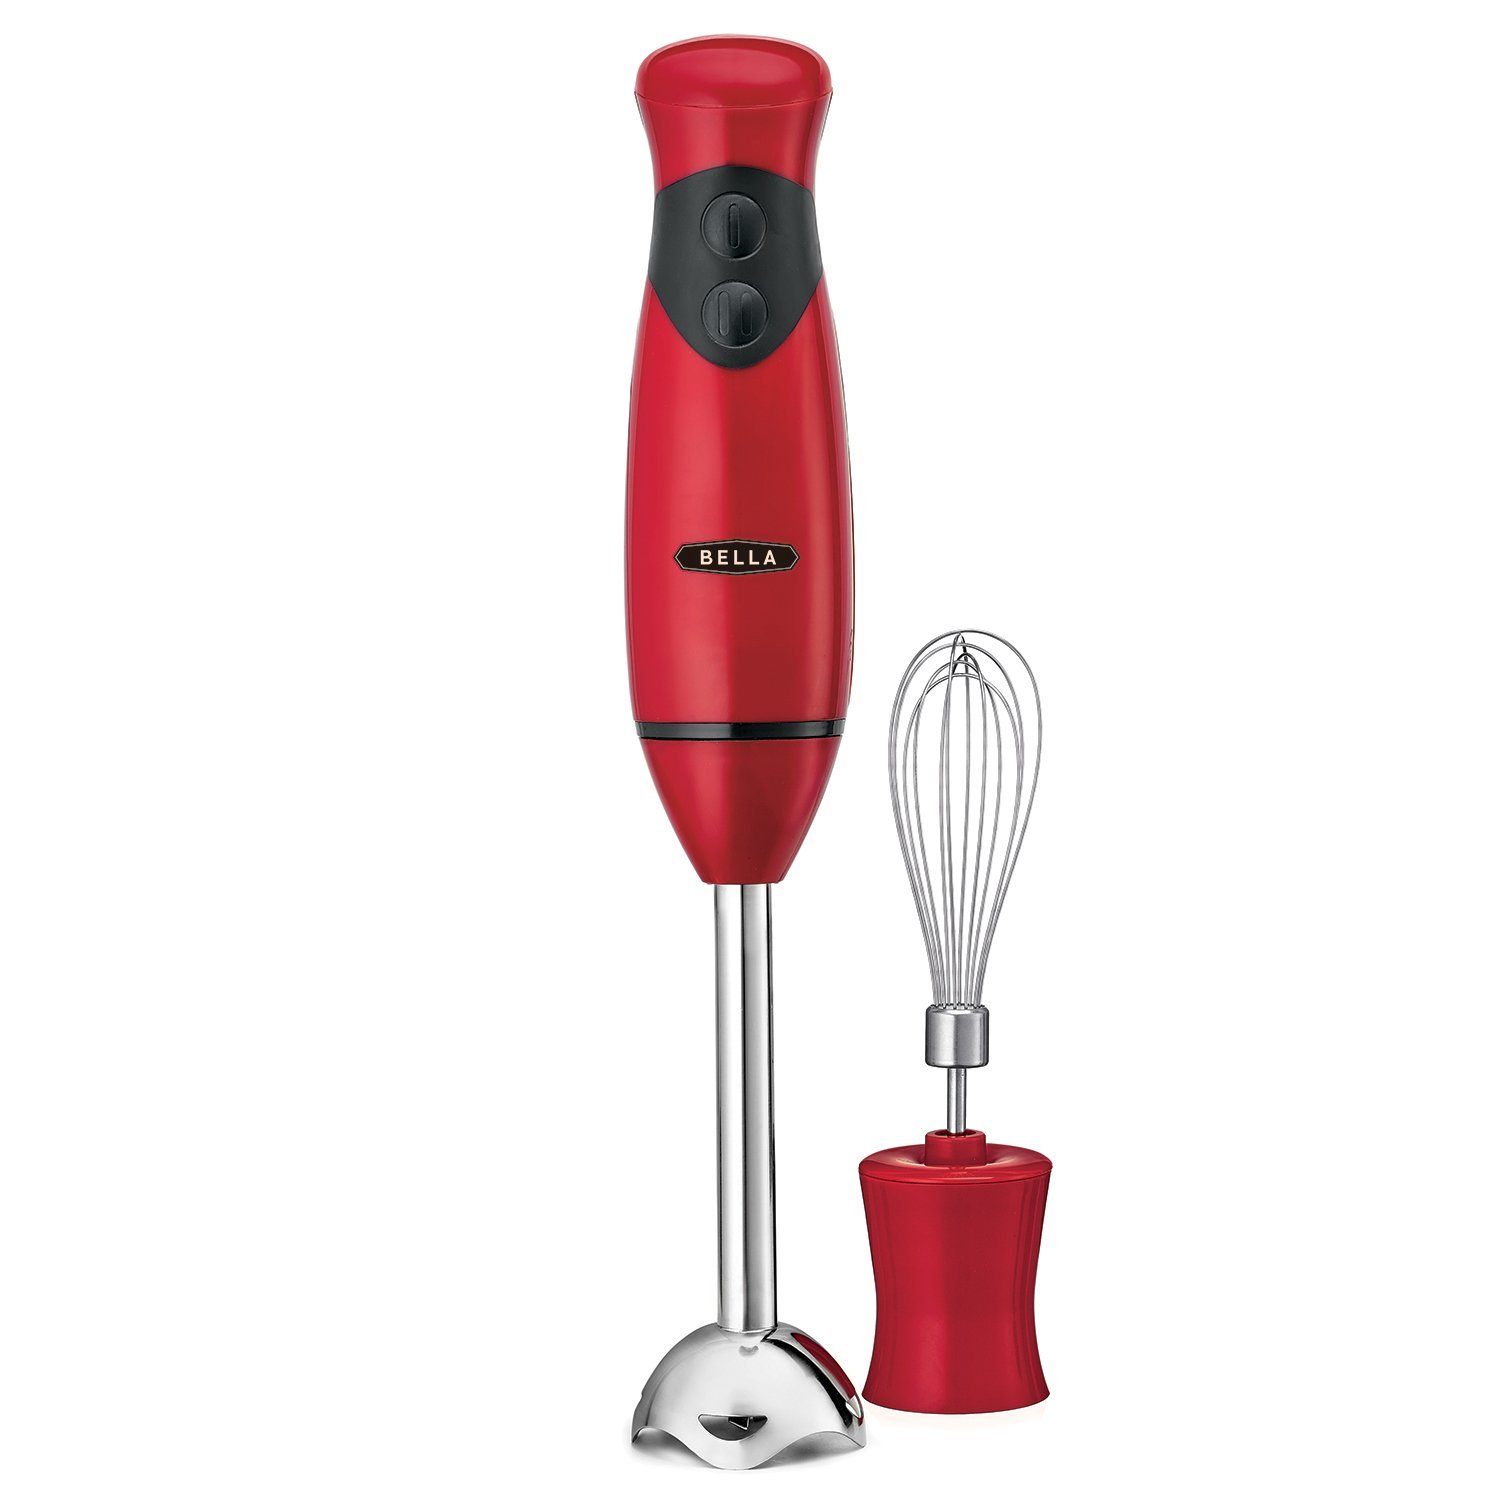 Bella Hand Immersion Blender (with Whisk Attachment) Only $16.92!